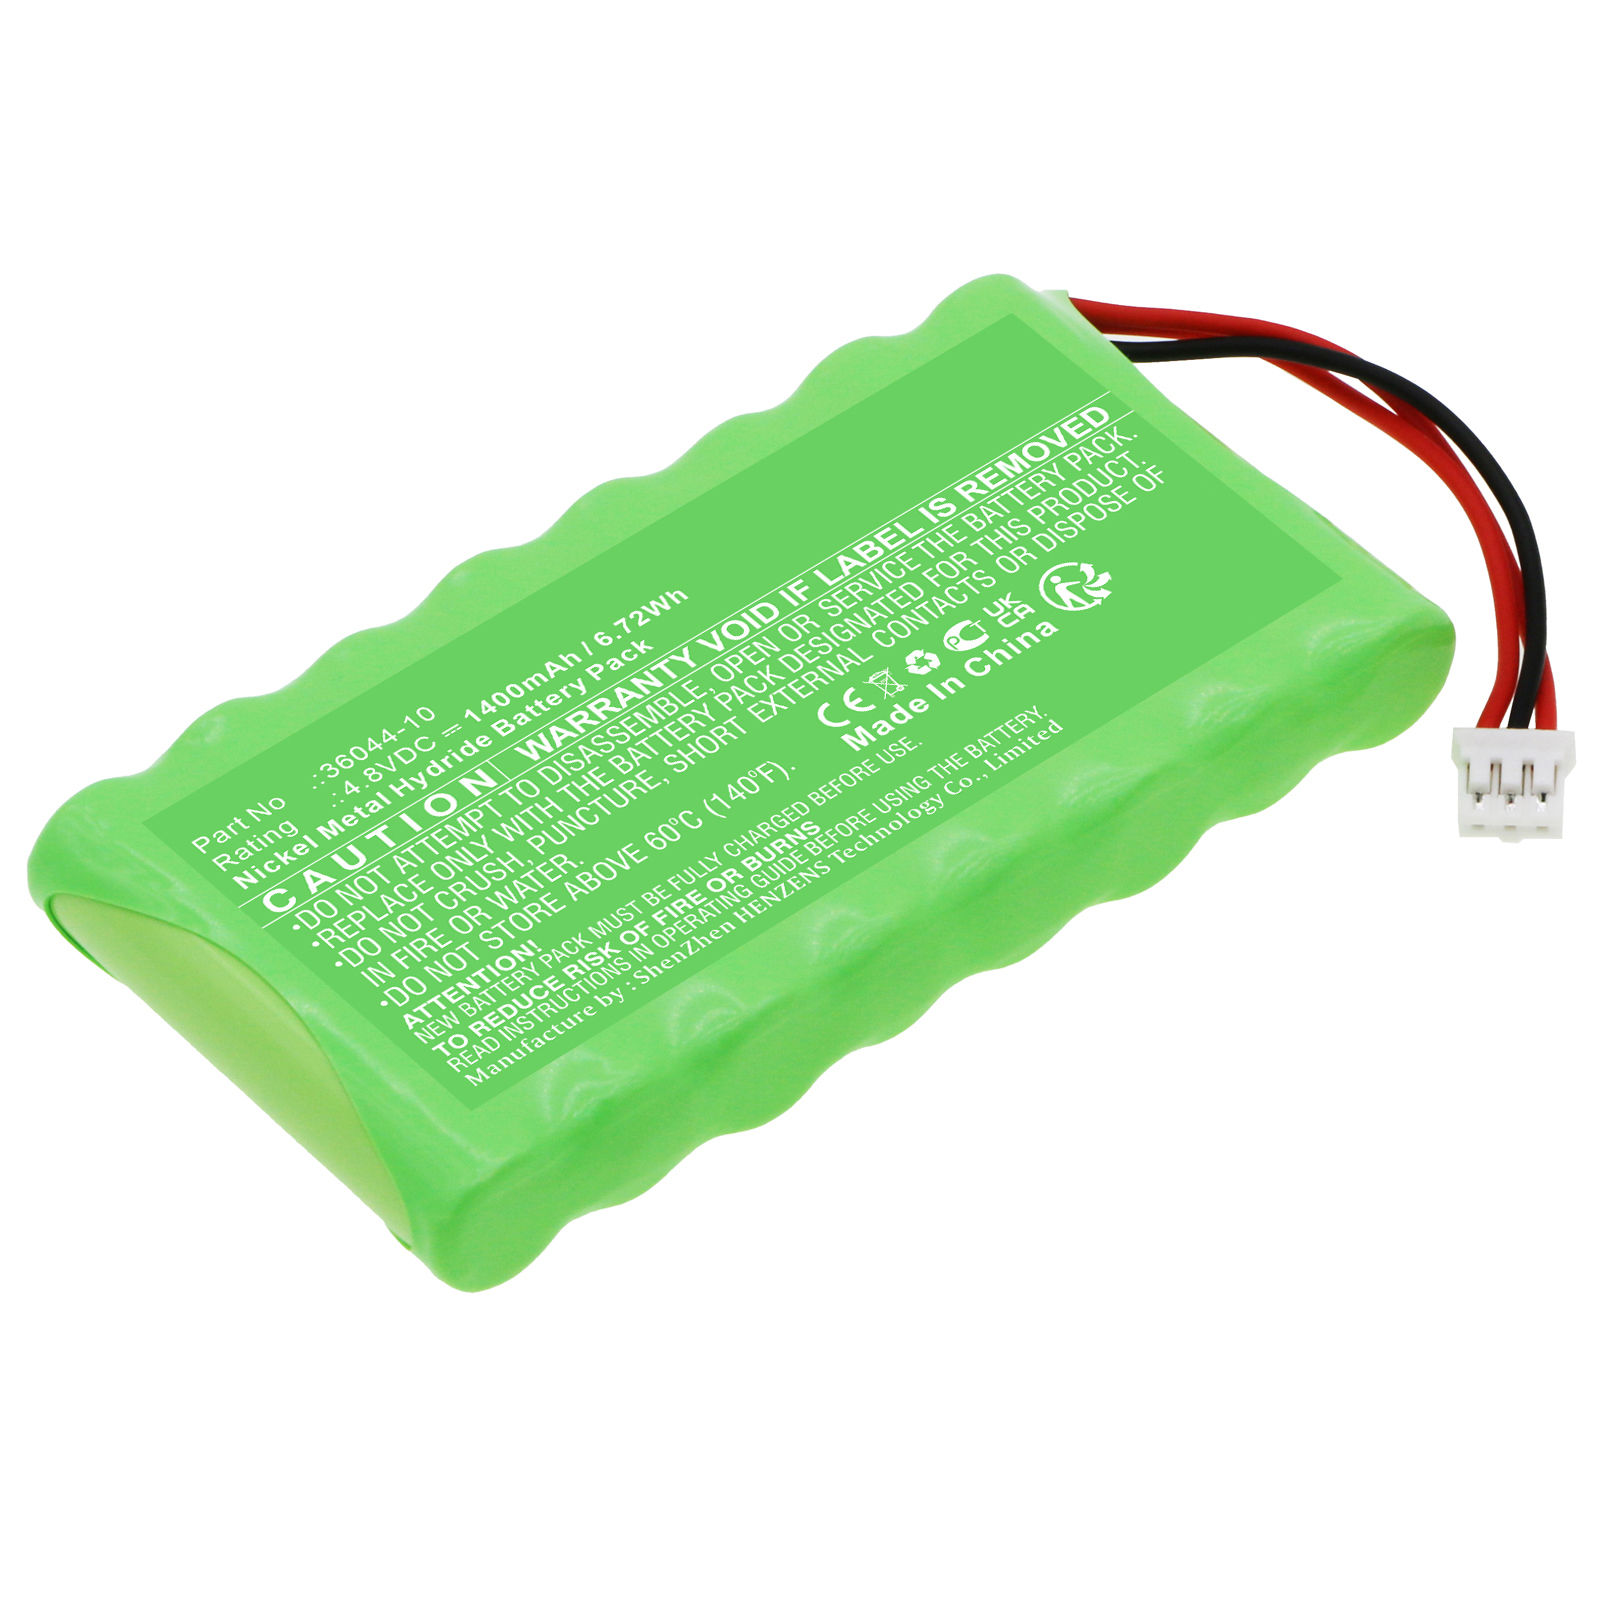 Synergy Digital Baby Monitor Battery, Compatible with Summer 36044-10 Baby Monitor Battery (Ni-MH, 4.8V, 1400mAh)